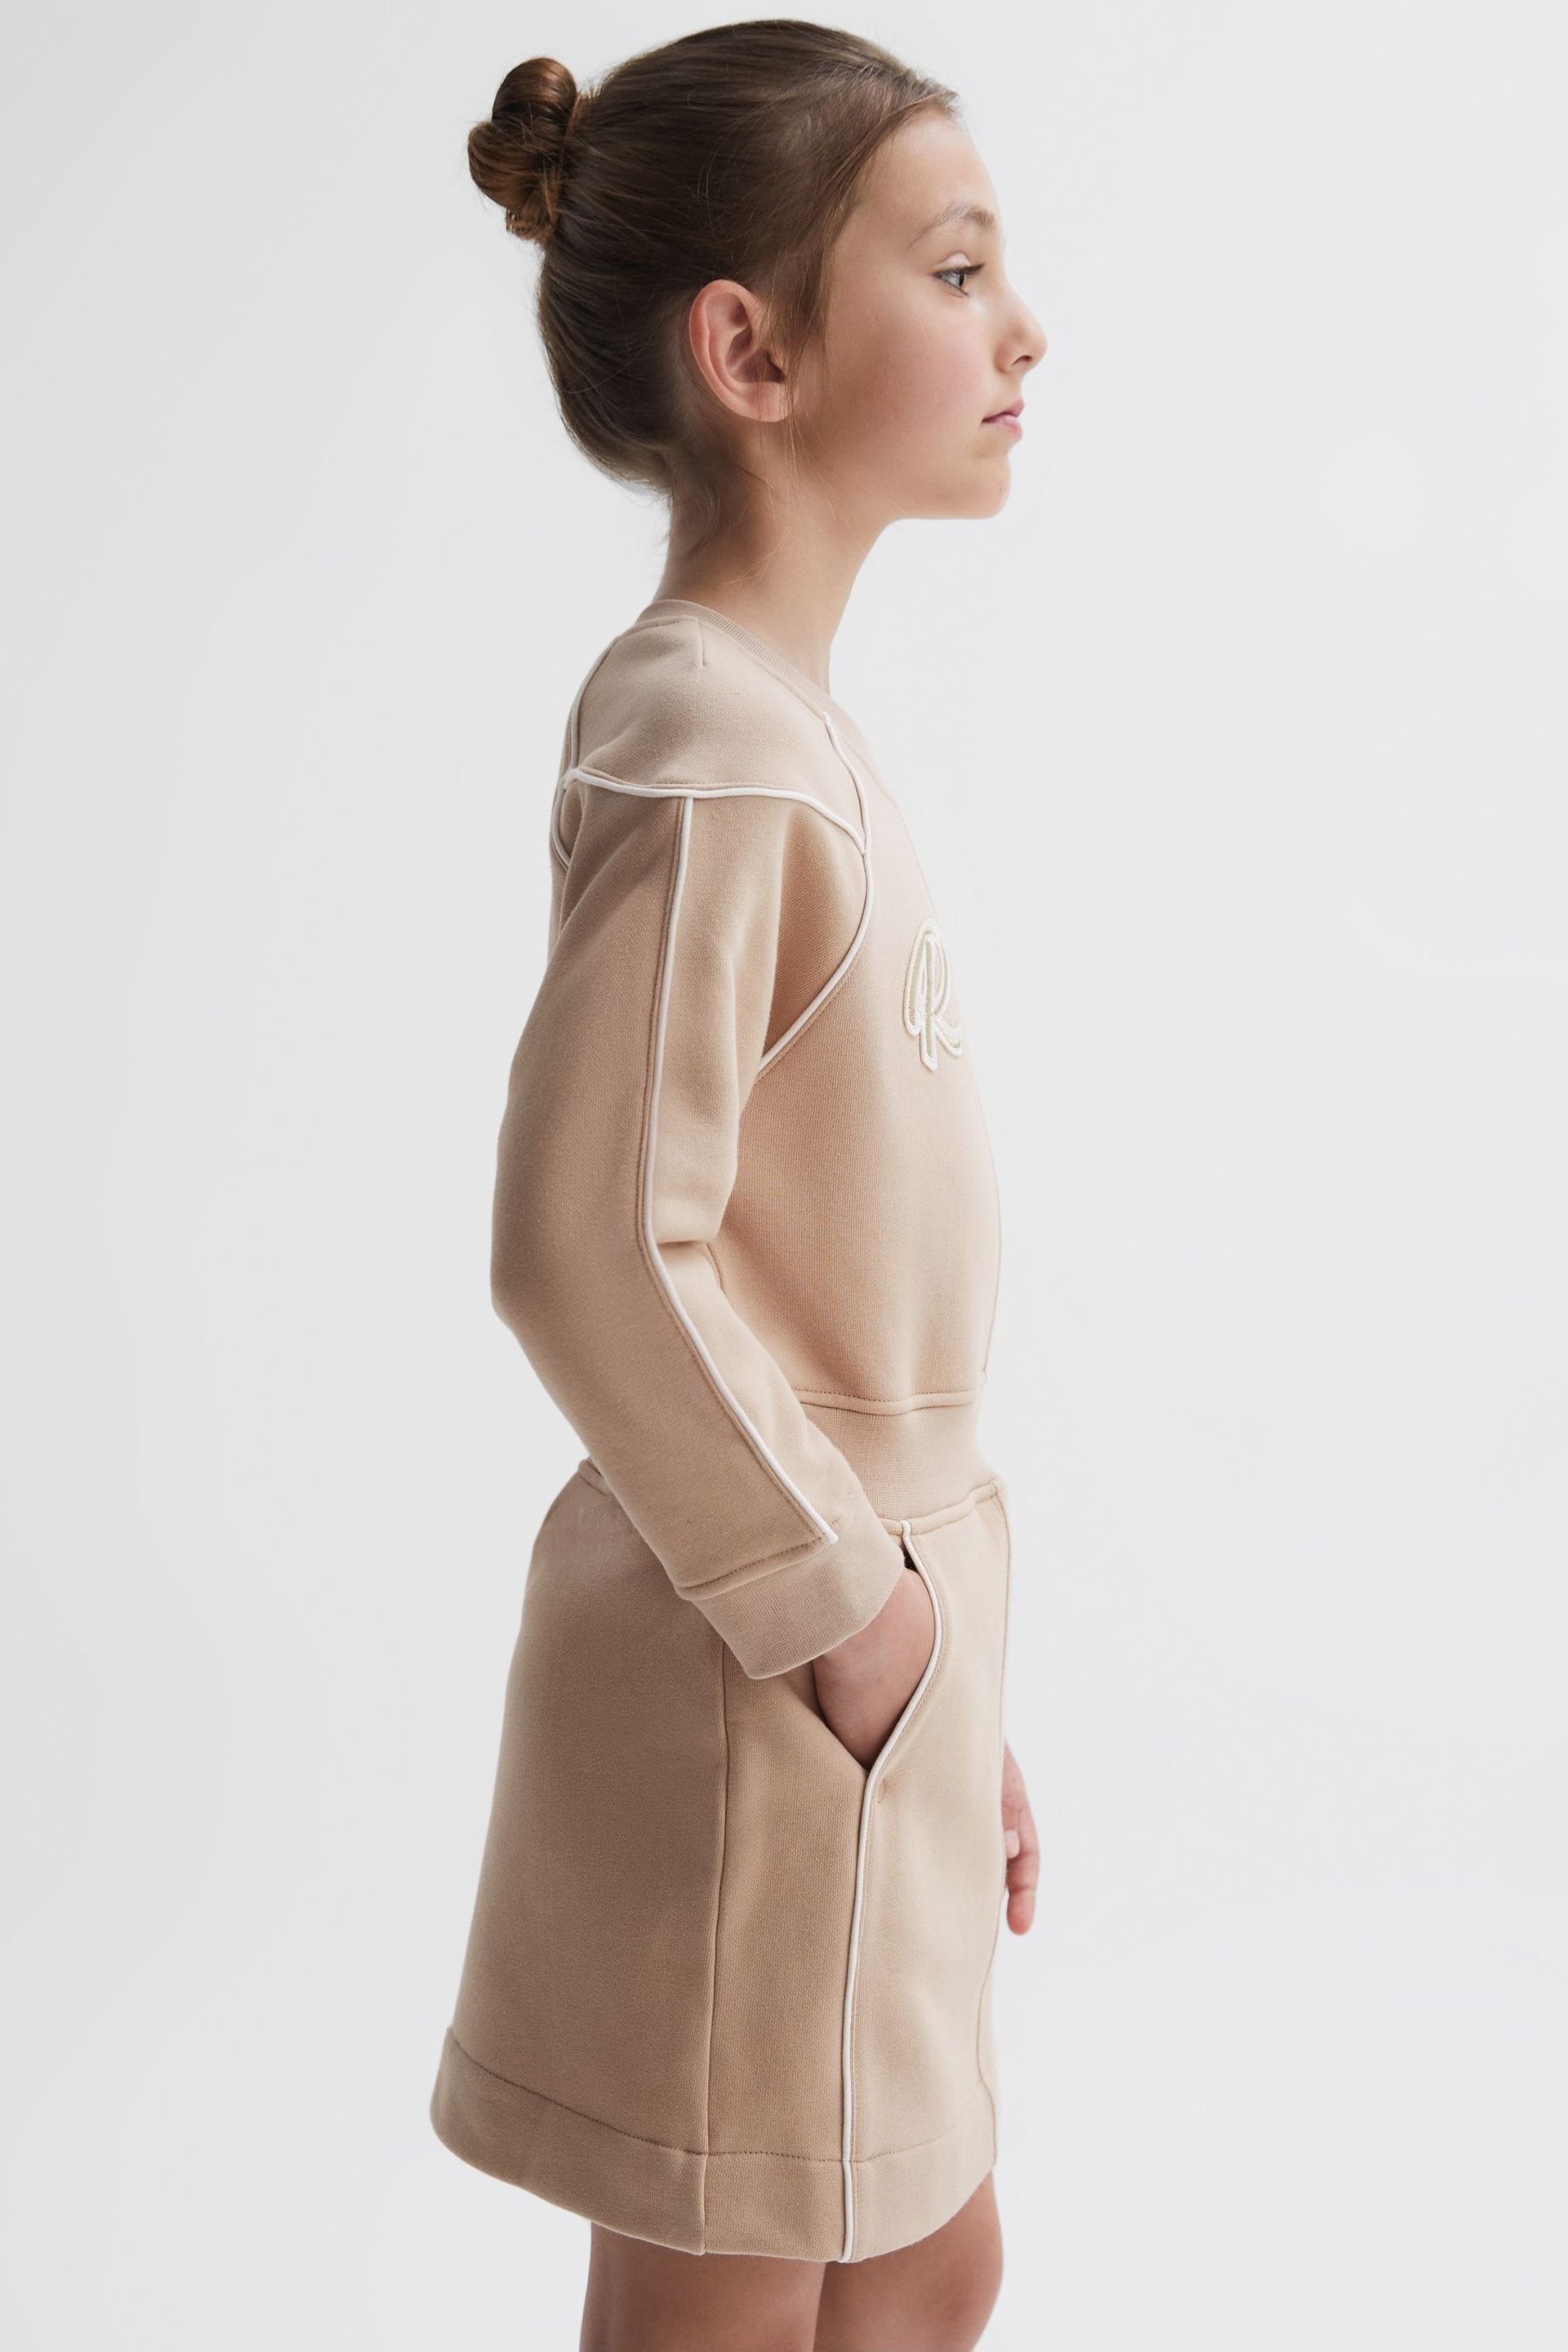 Reiss Camel Jona Junior Embroidered Jersey Dress - Image 3 of 5